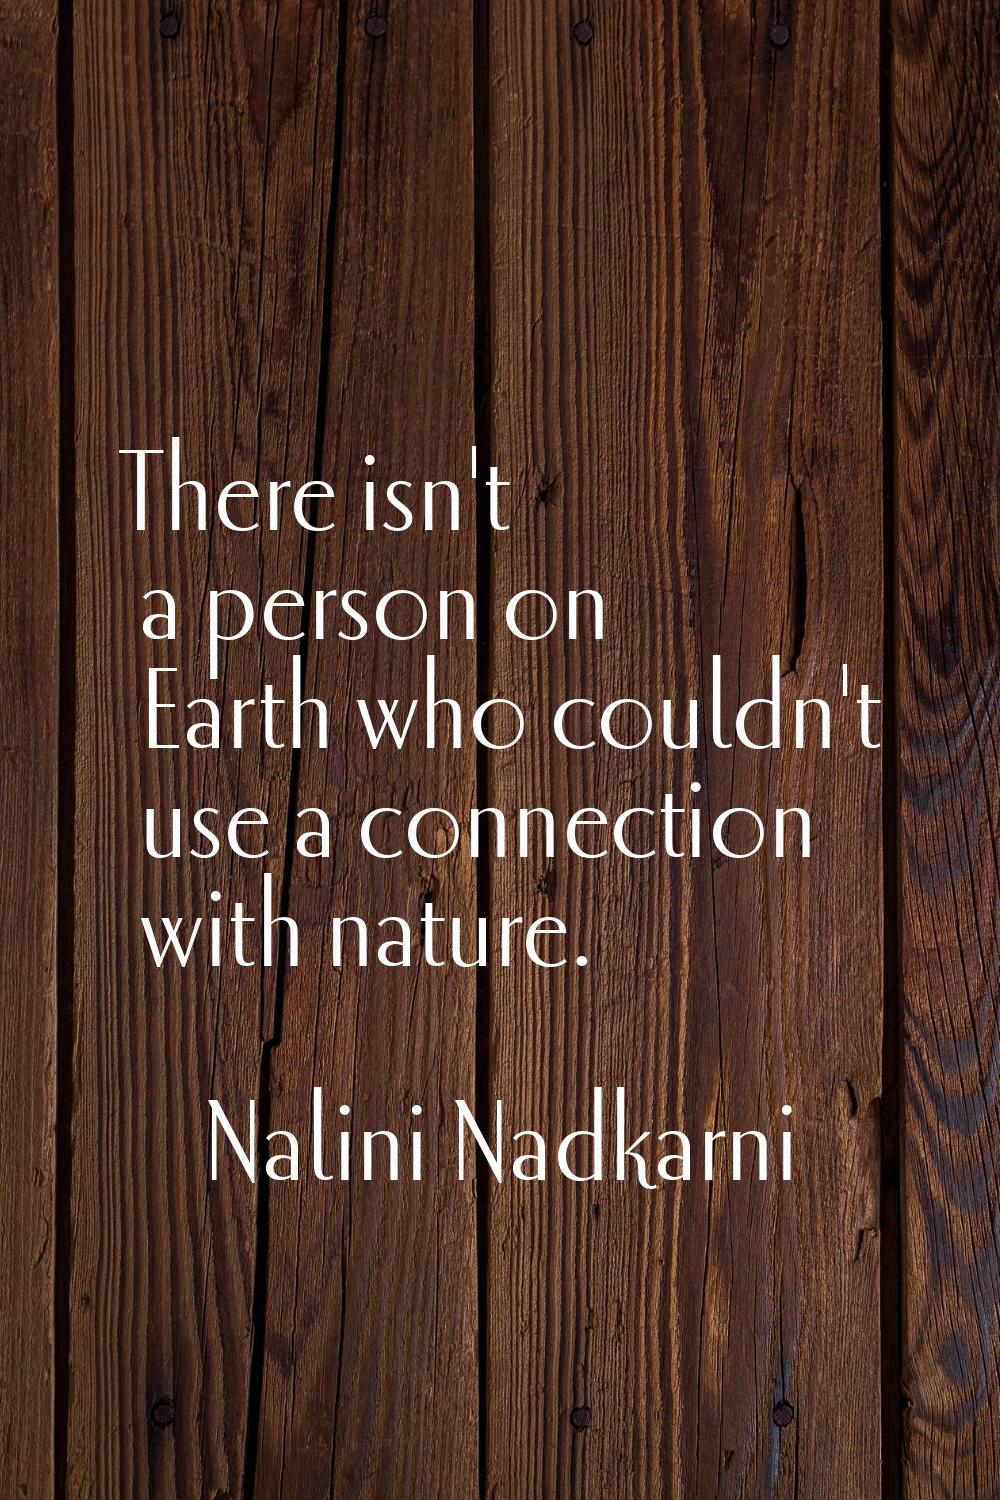 There isn't a person on Earth who couldn't use a connection with nature.